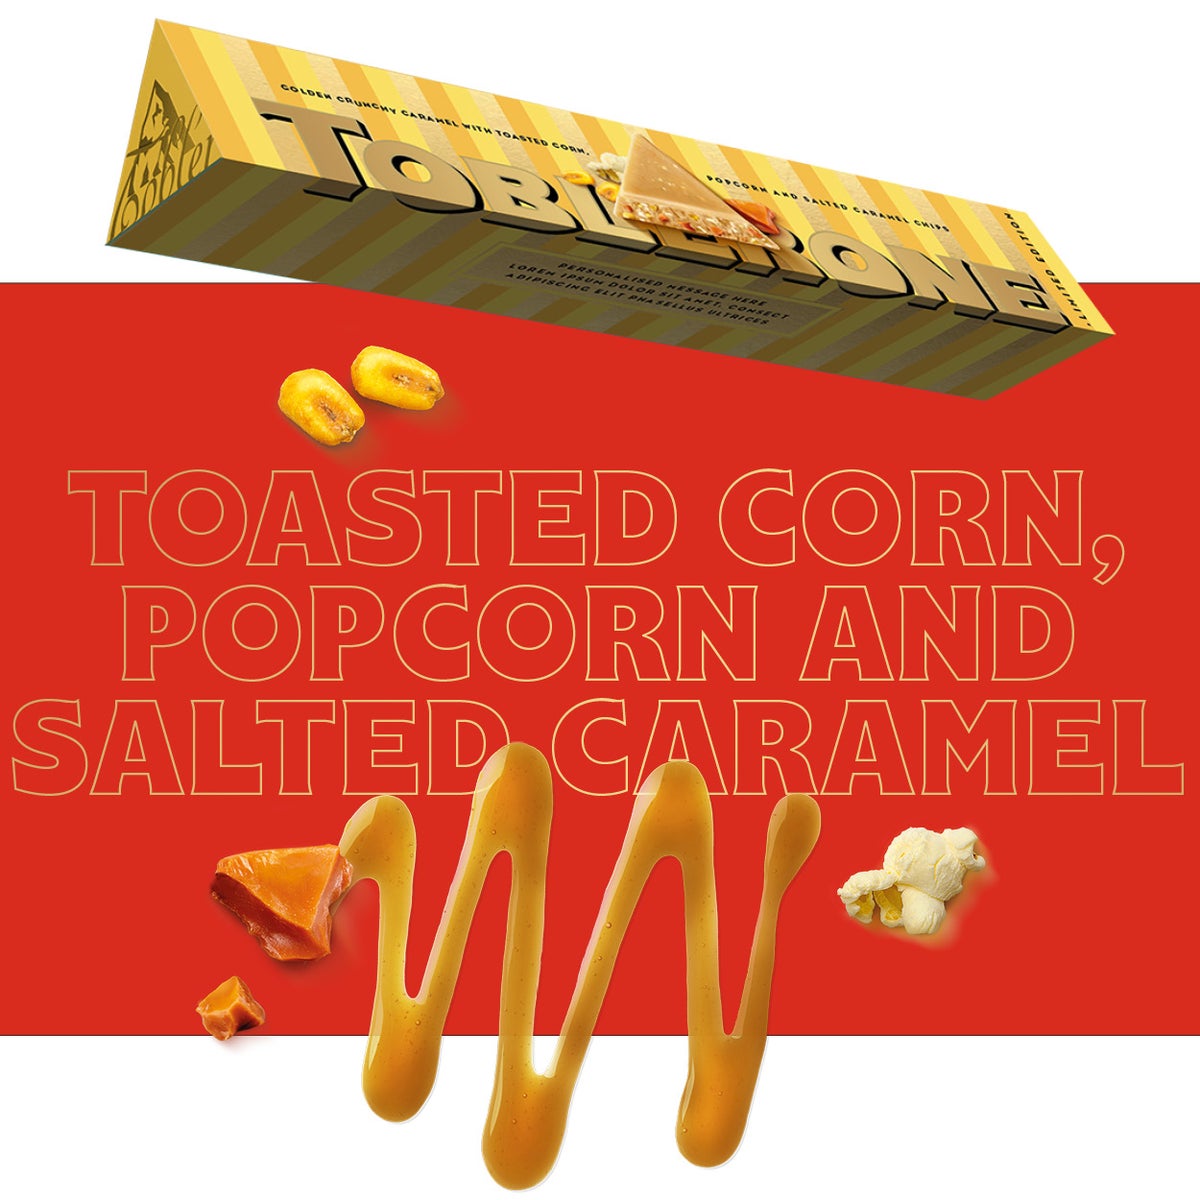 Toasted corn, popcorn and salted caramel